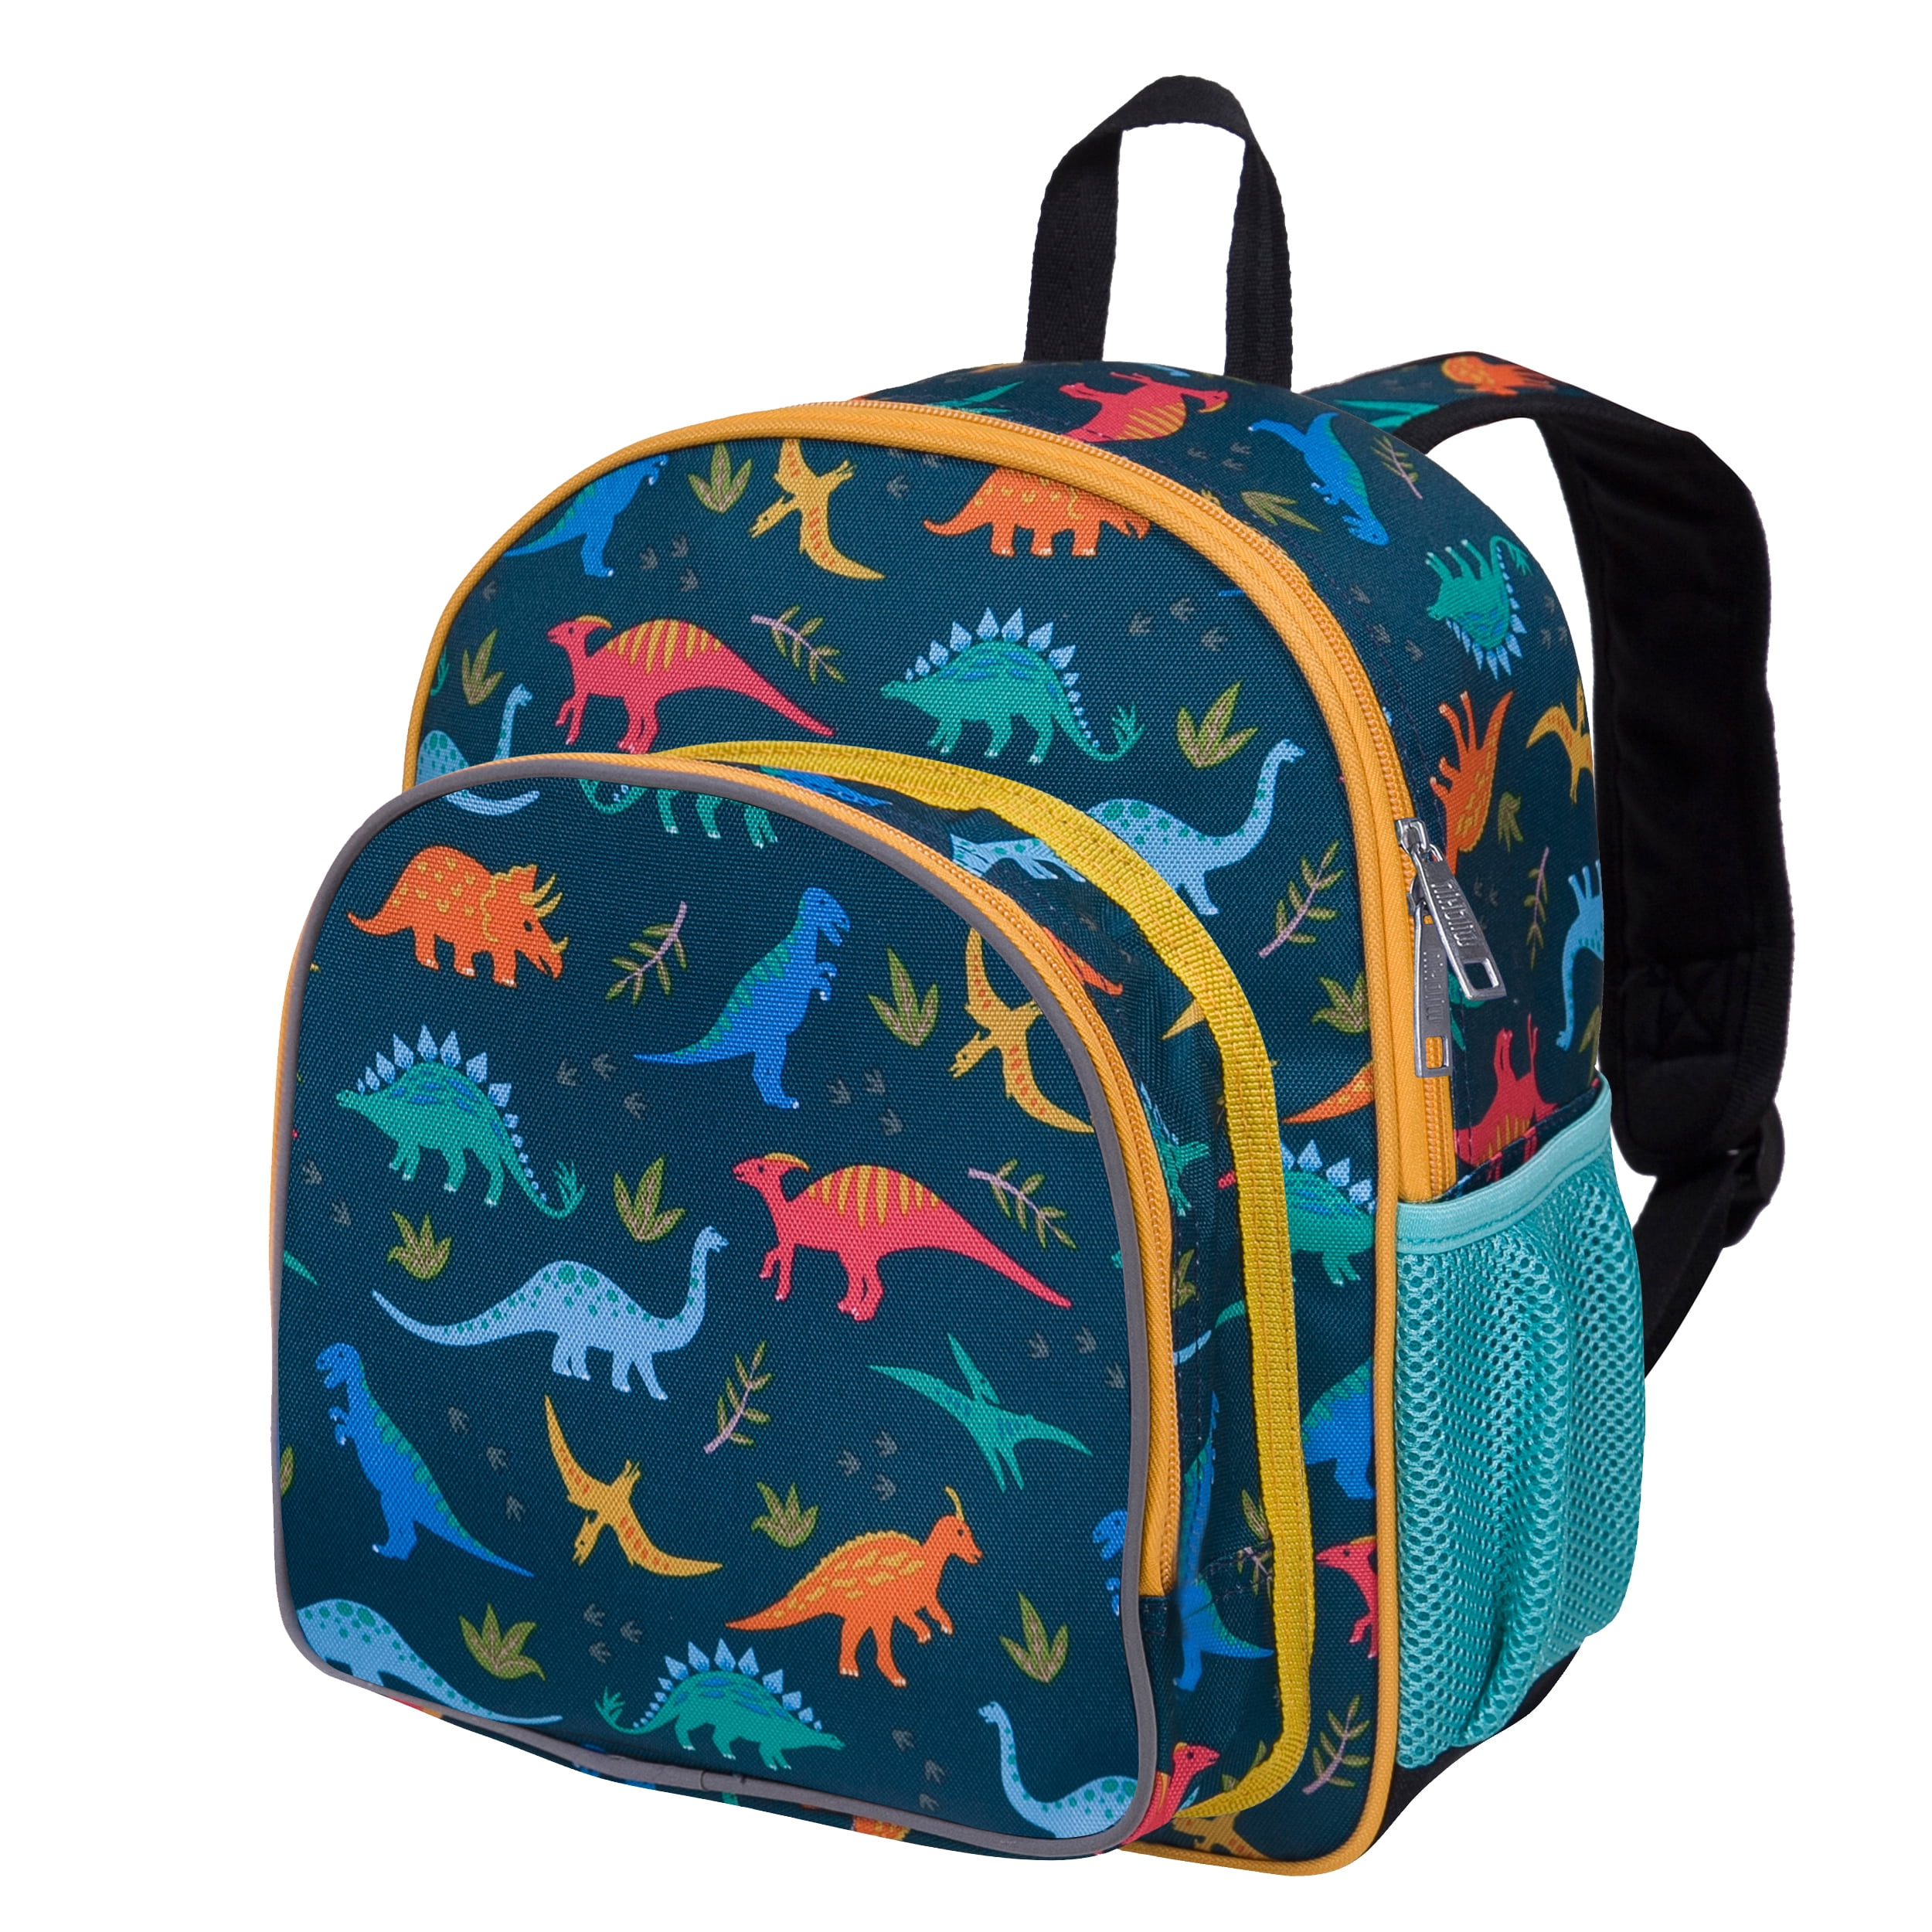 Wildkin Kids 12 Inch Backpack for Toddler Boys and Insulated Pocket (Jurassic Dinosaurs Green) - Walmart.com